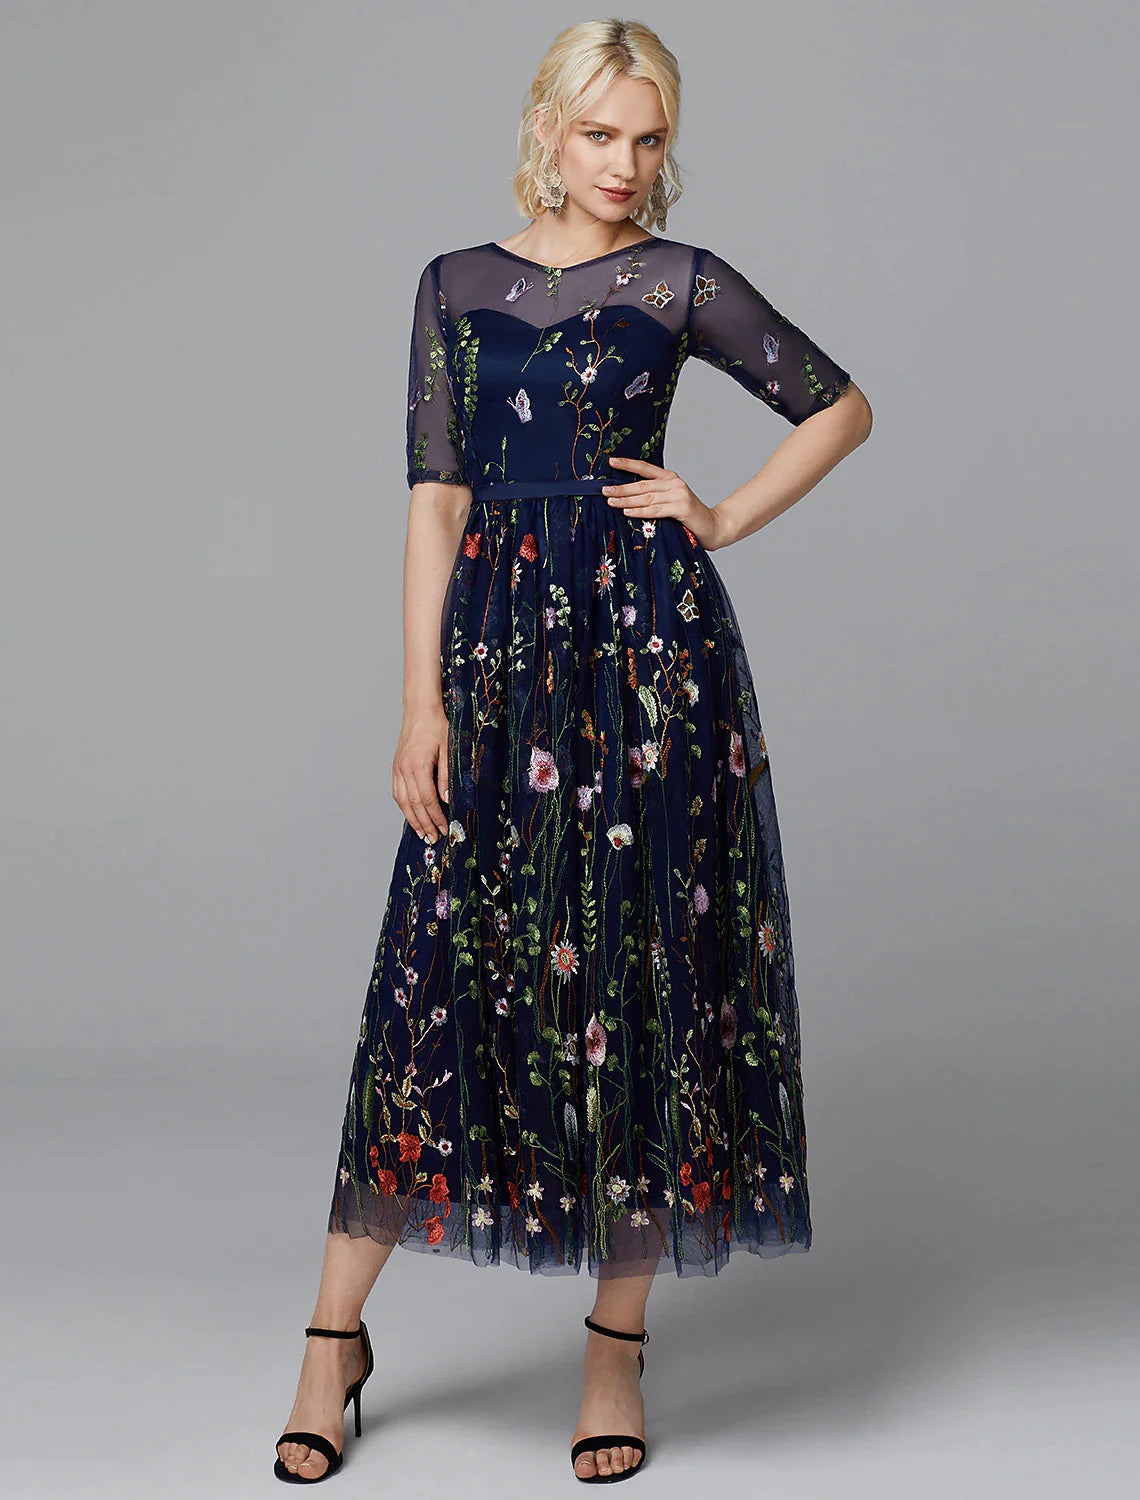 A-Line Floral Dress Holiday Tea Length Half Sleeve Illusion Neck Lace with Embroidery Appliques